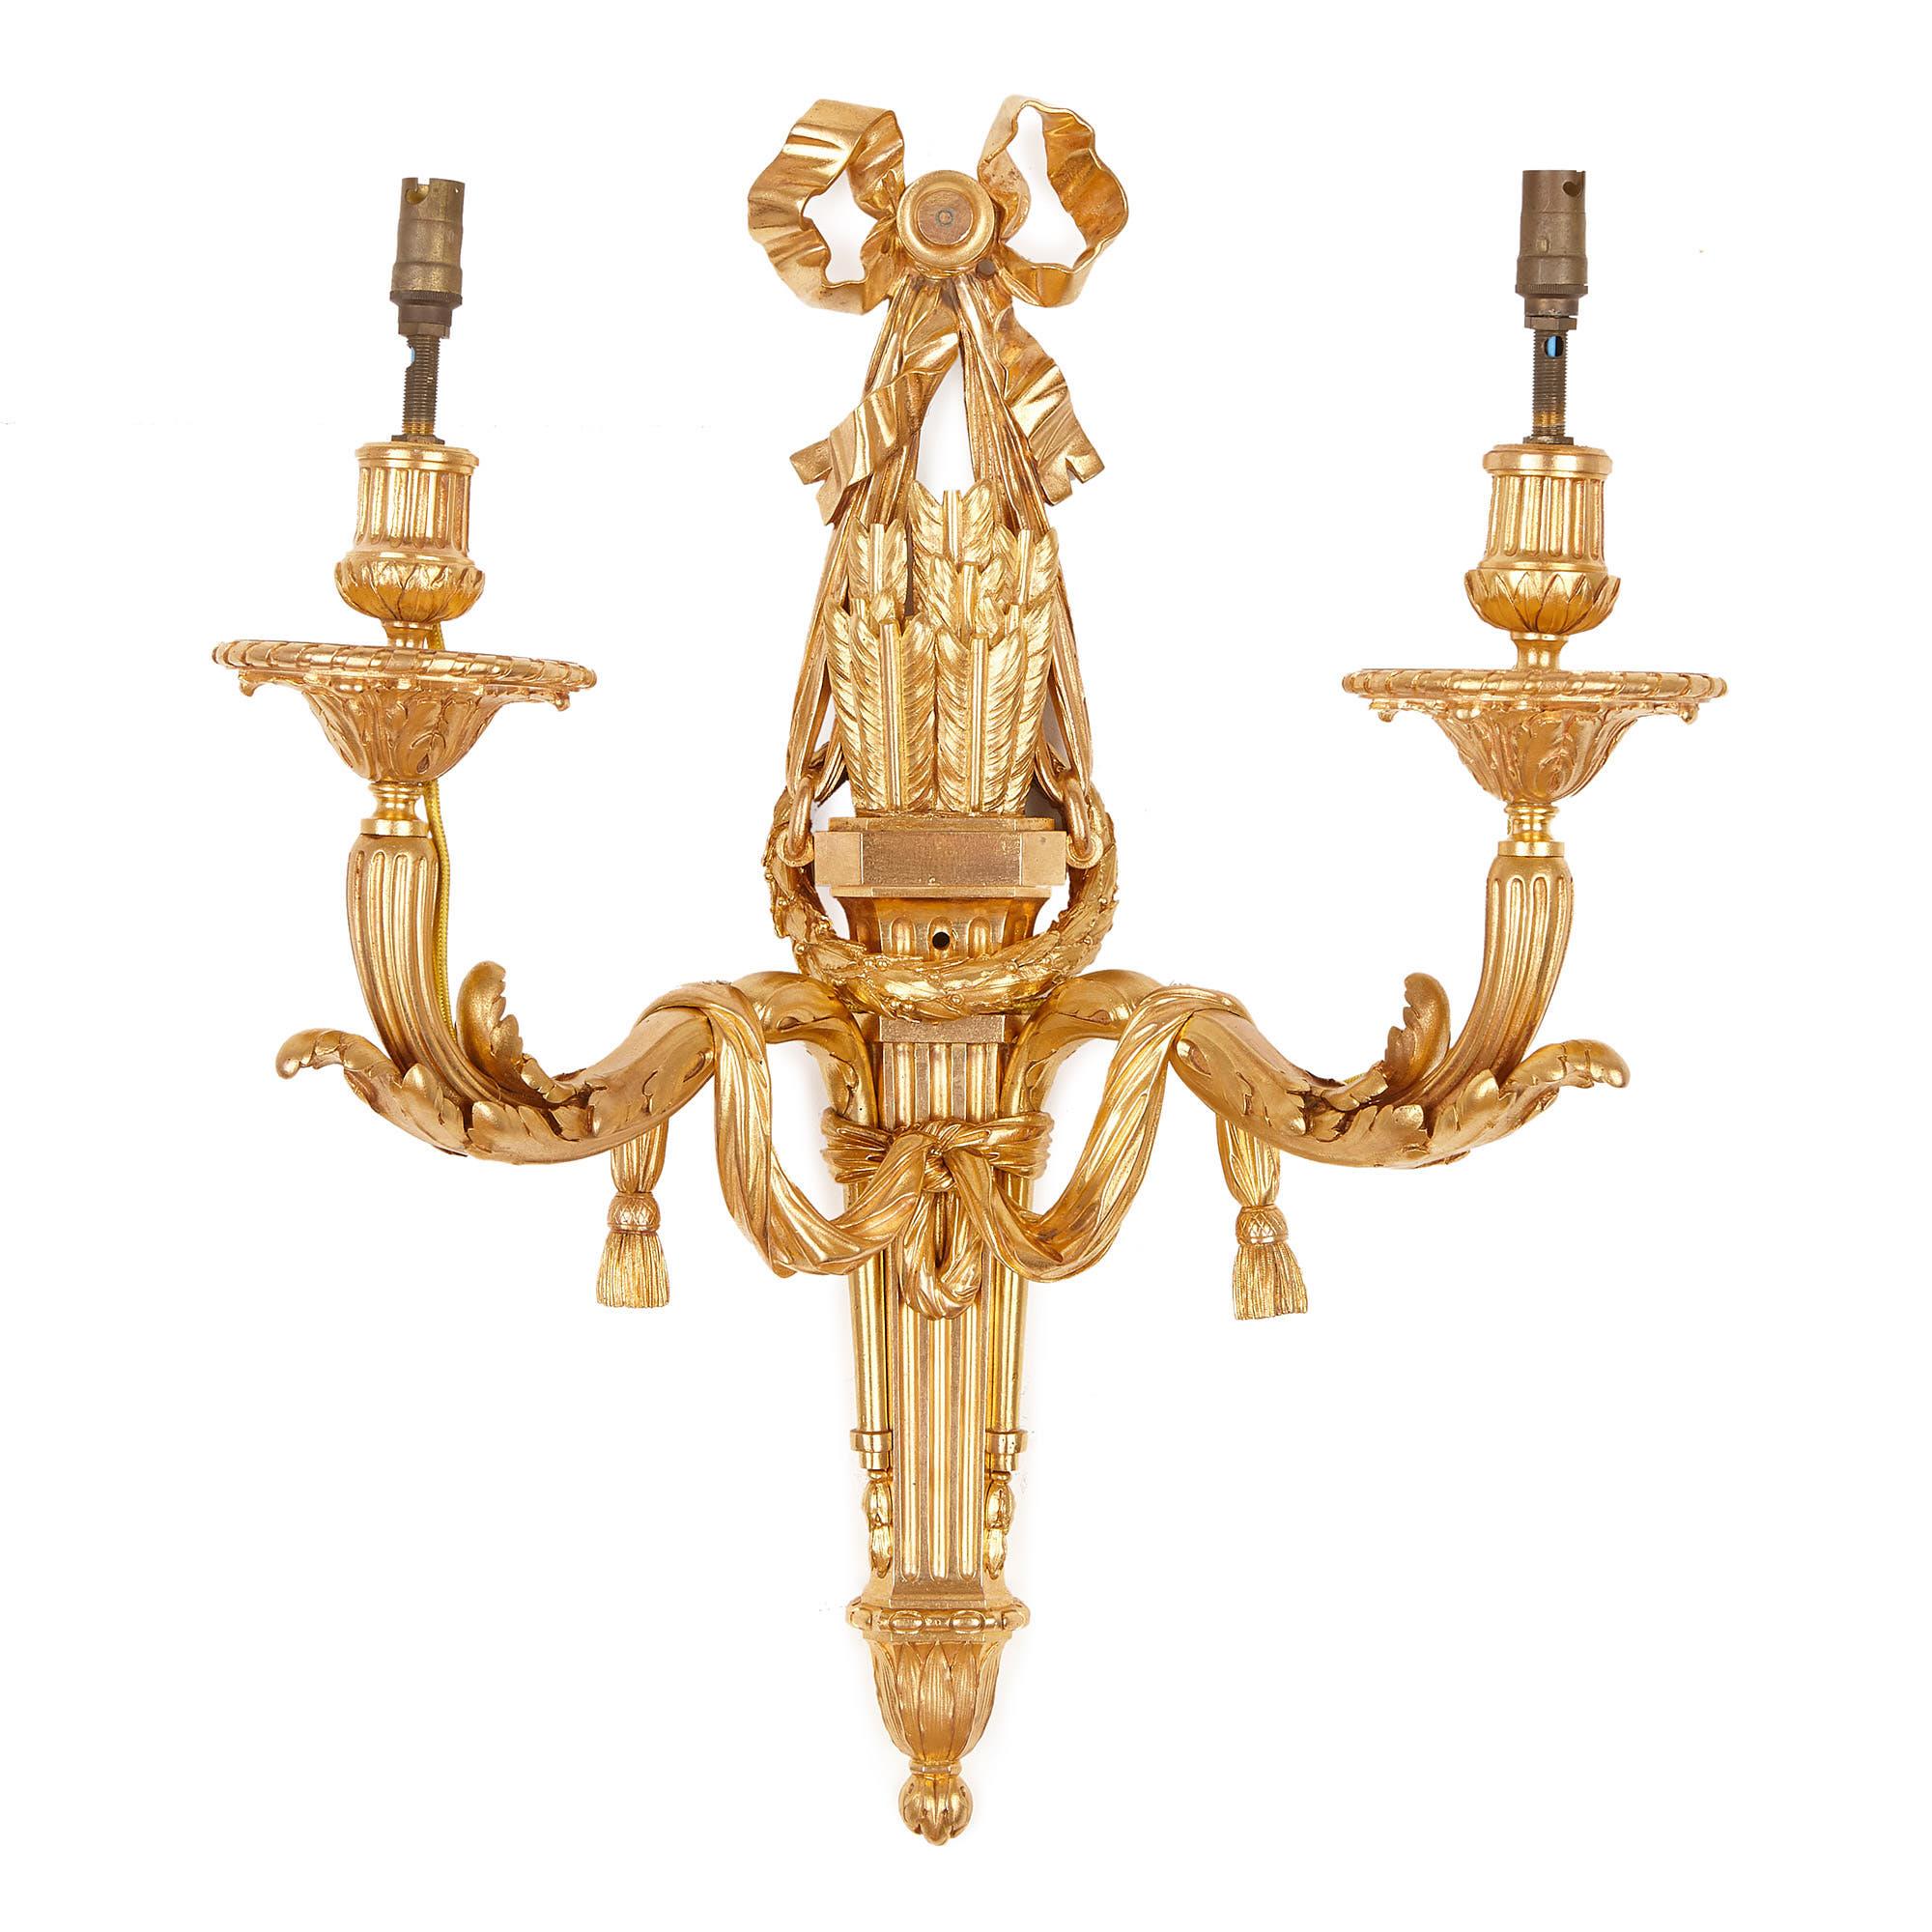 The gilt bronzes sconces are identically designed in an elegant neoclassical style. The stems of the sconces are shaped like arrow quivers, which are each mounted with two arms. These arms have foliate bases, which are draped with tasseled fabrics.